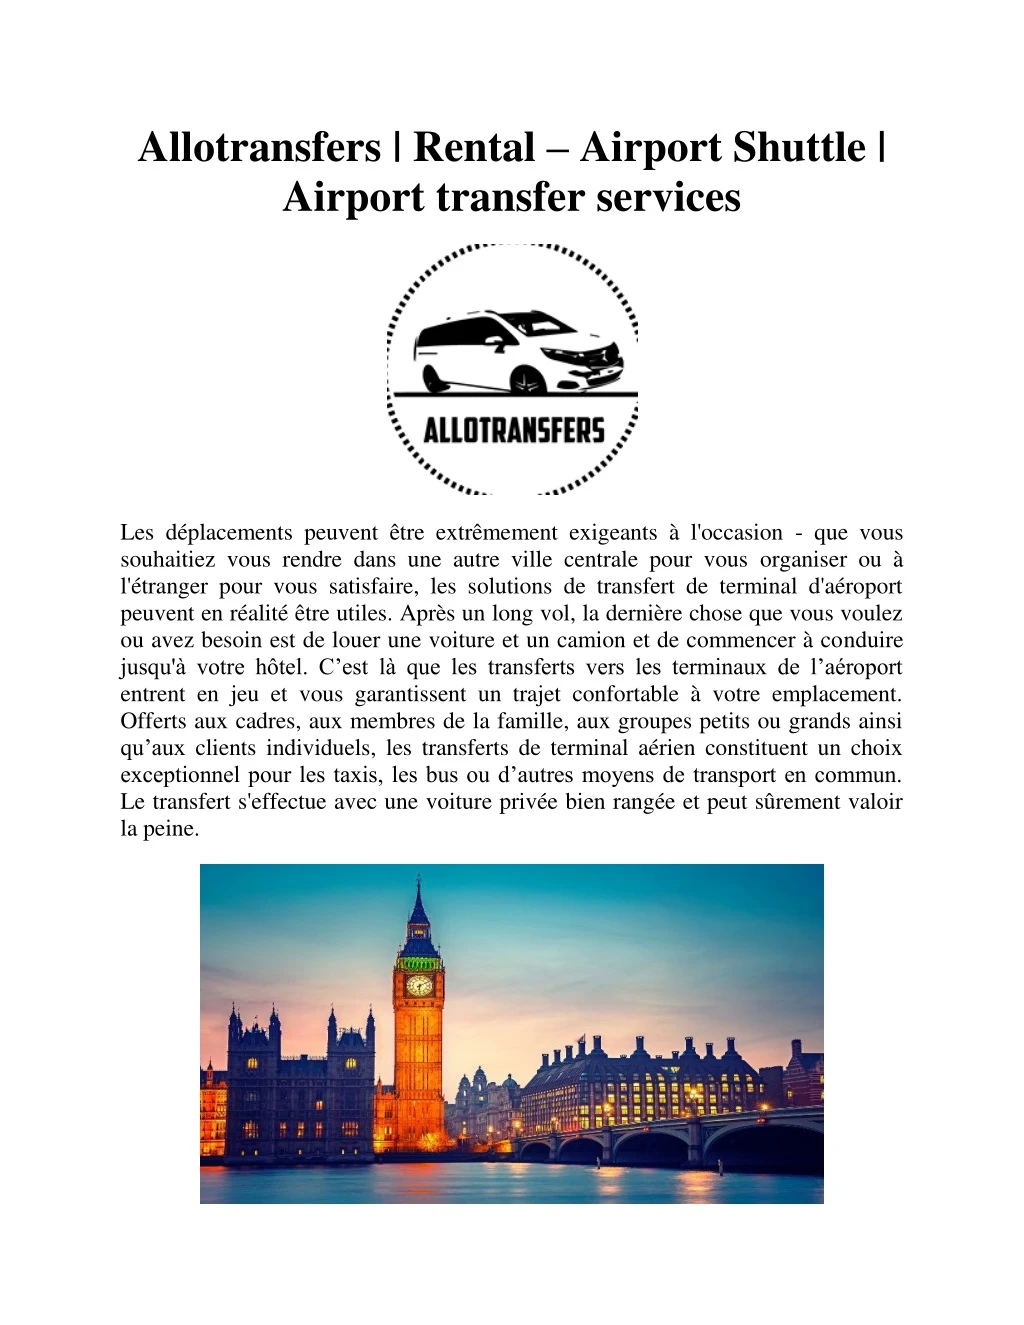 allotransfers rental airport shuttle airport